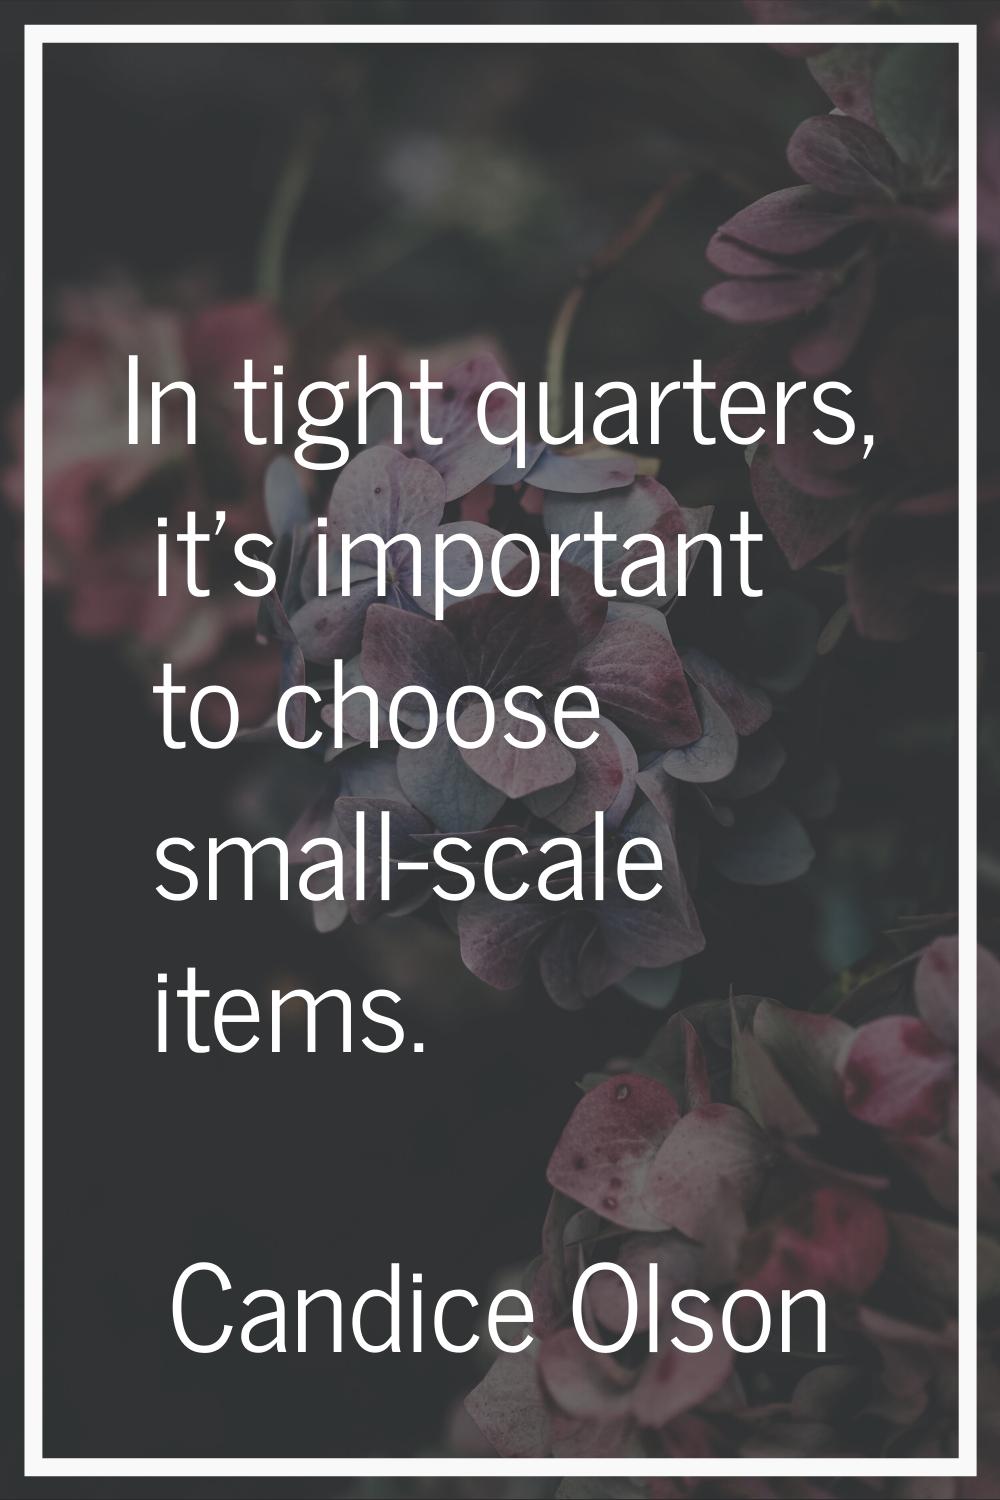 In tight quarters, it's important to choose small-scale items.